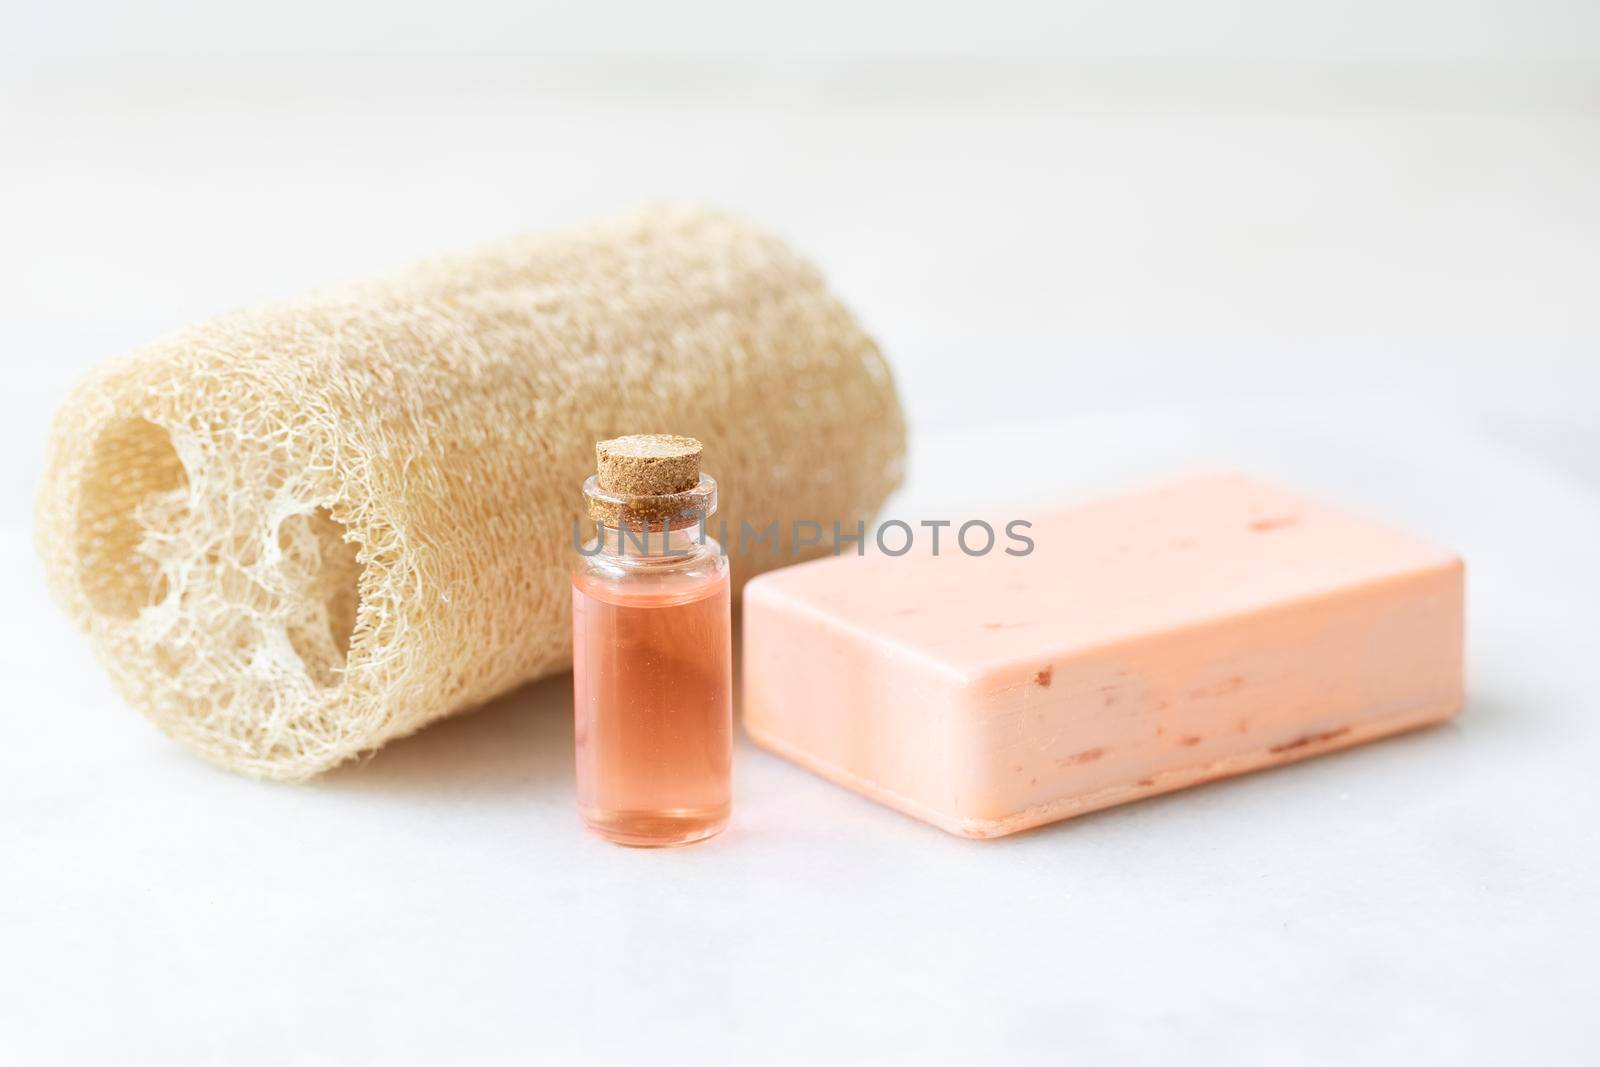 Bar of soap with two small bottles of fruit extracts and loofa sponge.